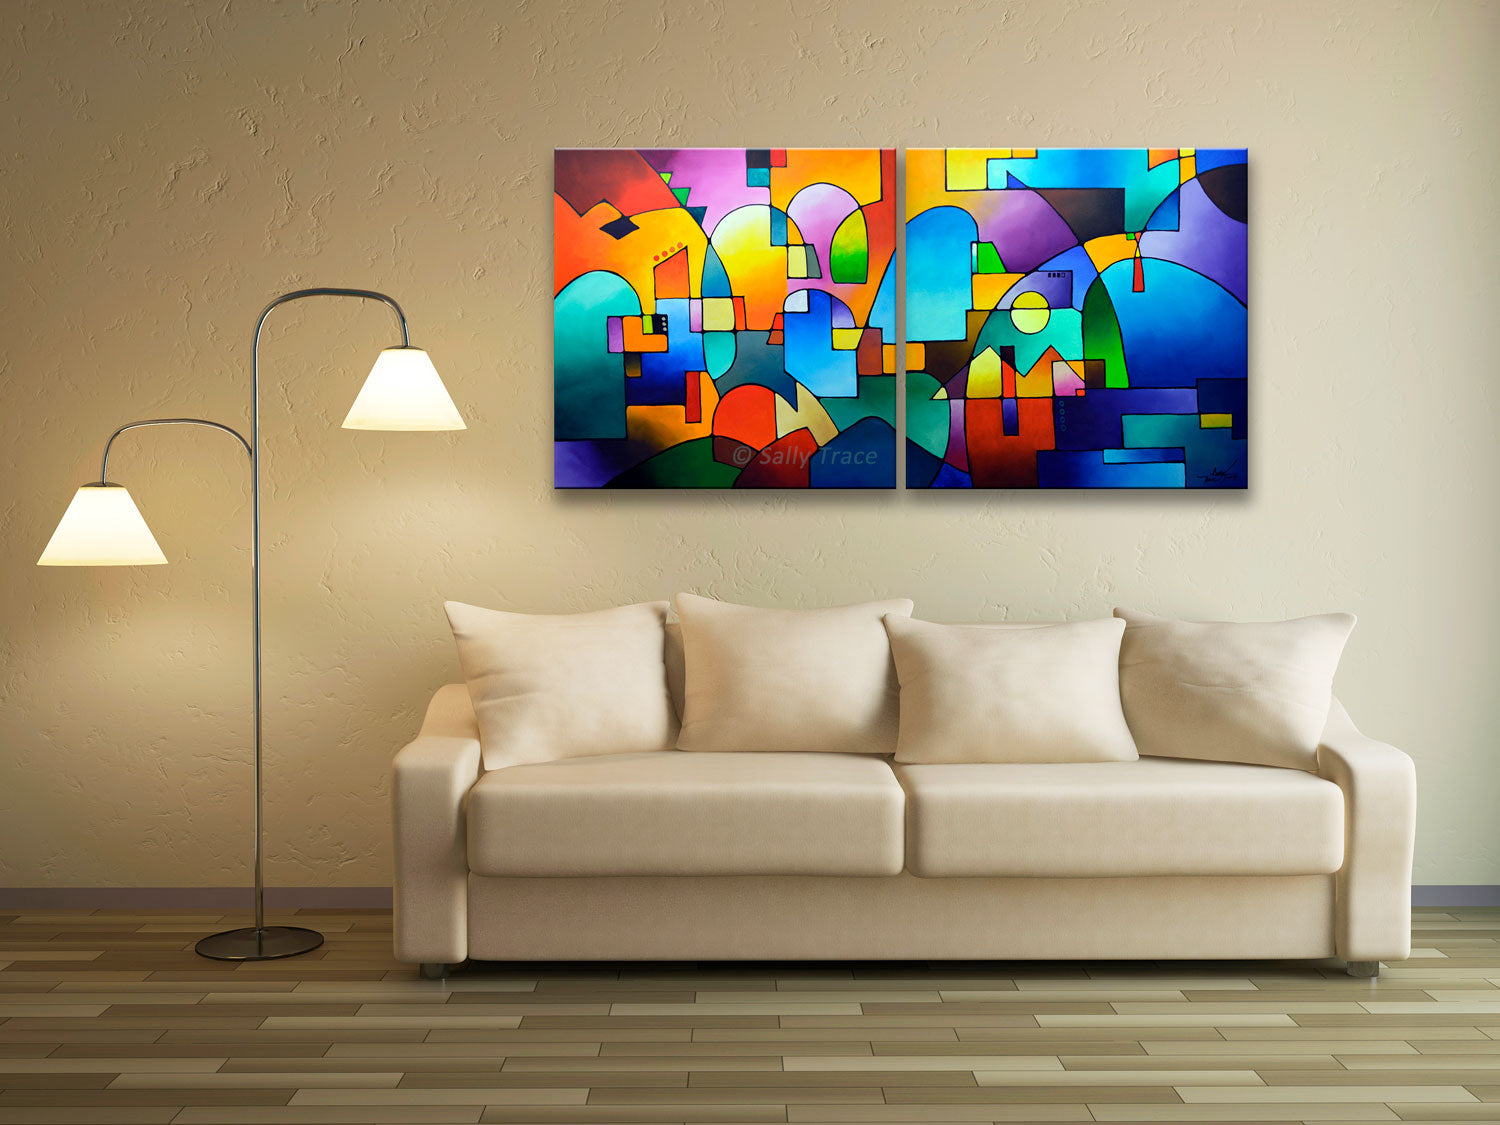 Giclee prints on stretched canvas made from my original abstract painting "Urbanity Vista". These stretched canvas giclee prints are made from my original abstract diptych painting, one of my Urbanity Series paintings and prints, roomview.